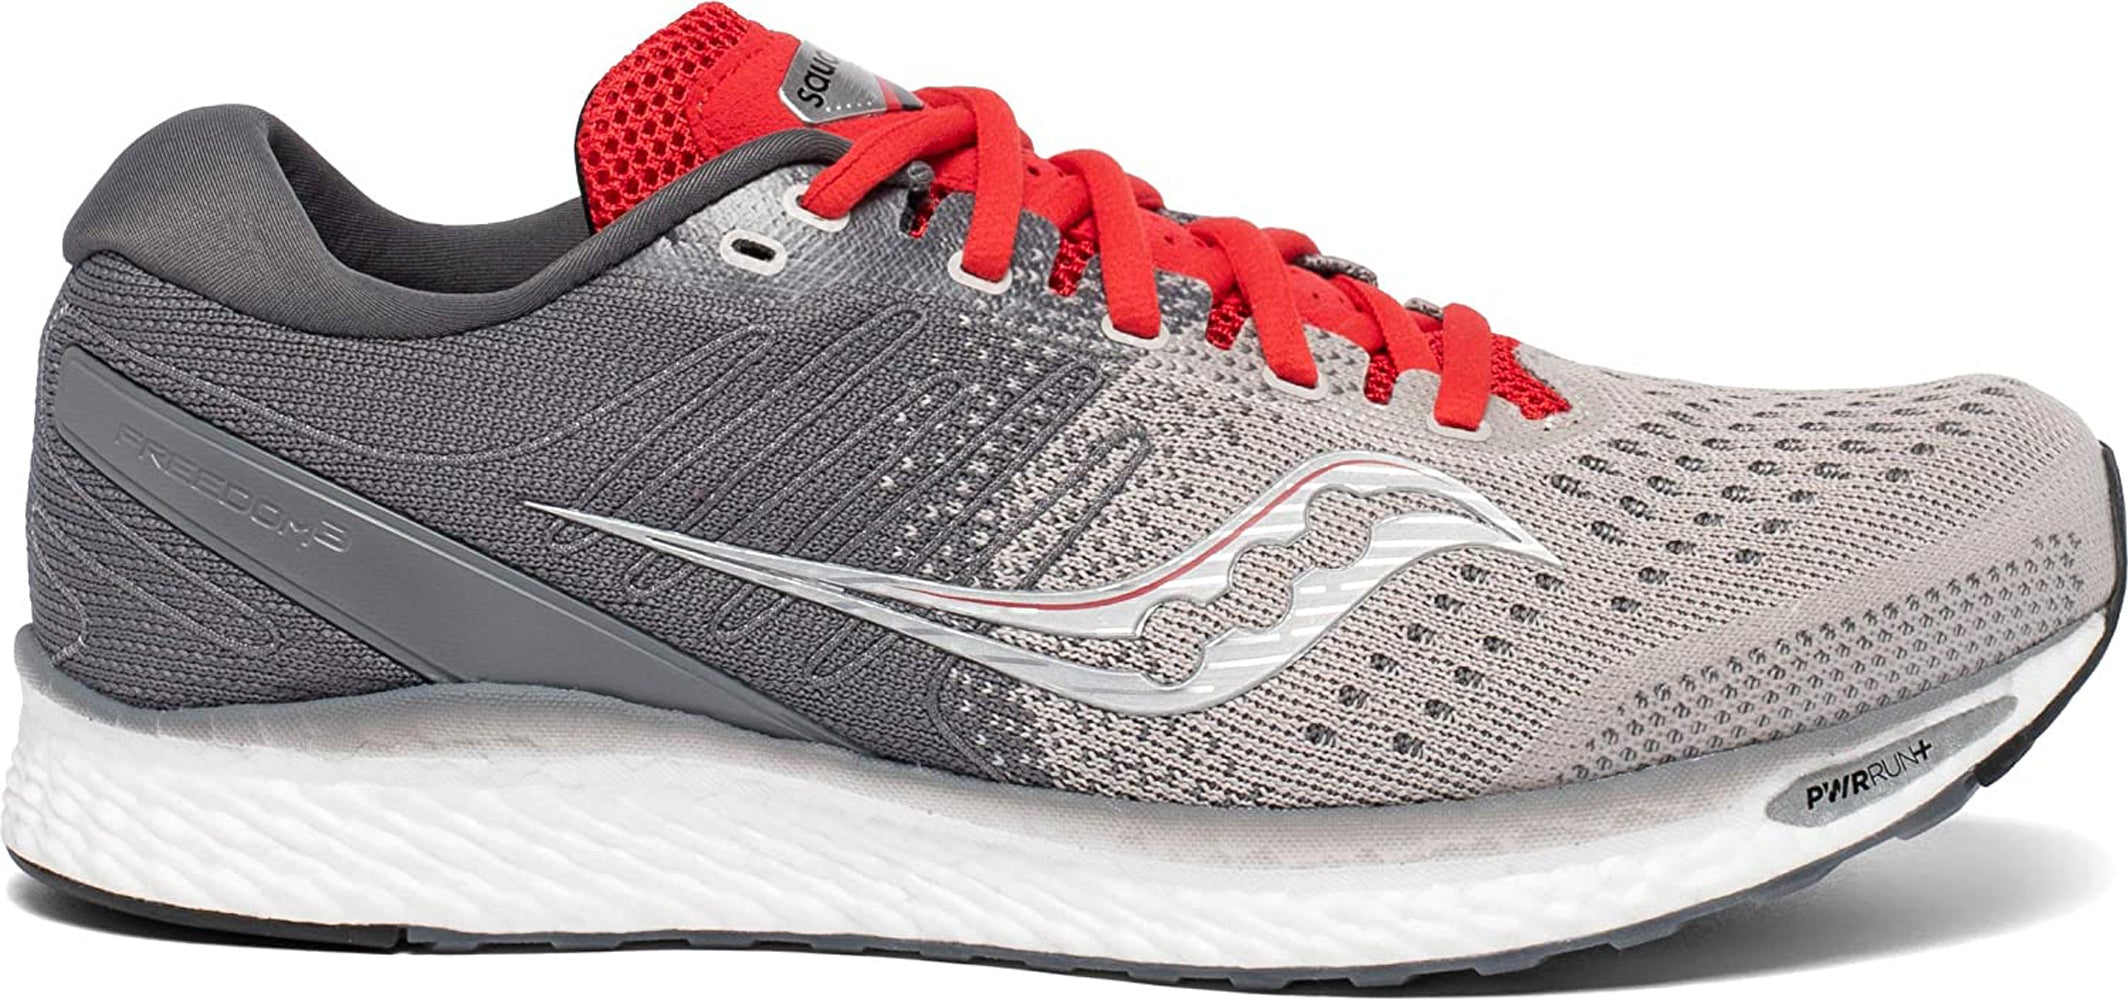 Saucony Men's Freedom 3 Running Shoe in Moonrock Red Side Angle View